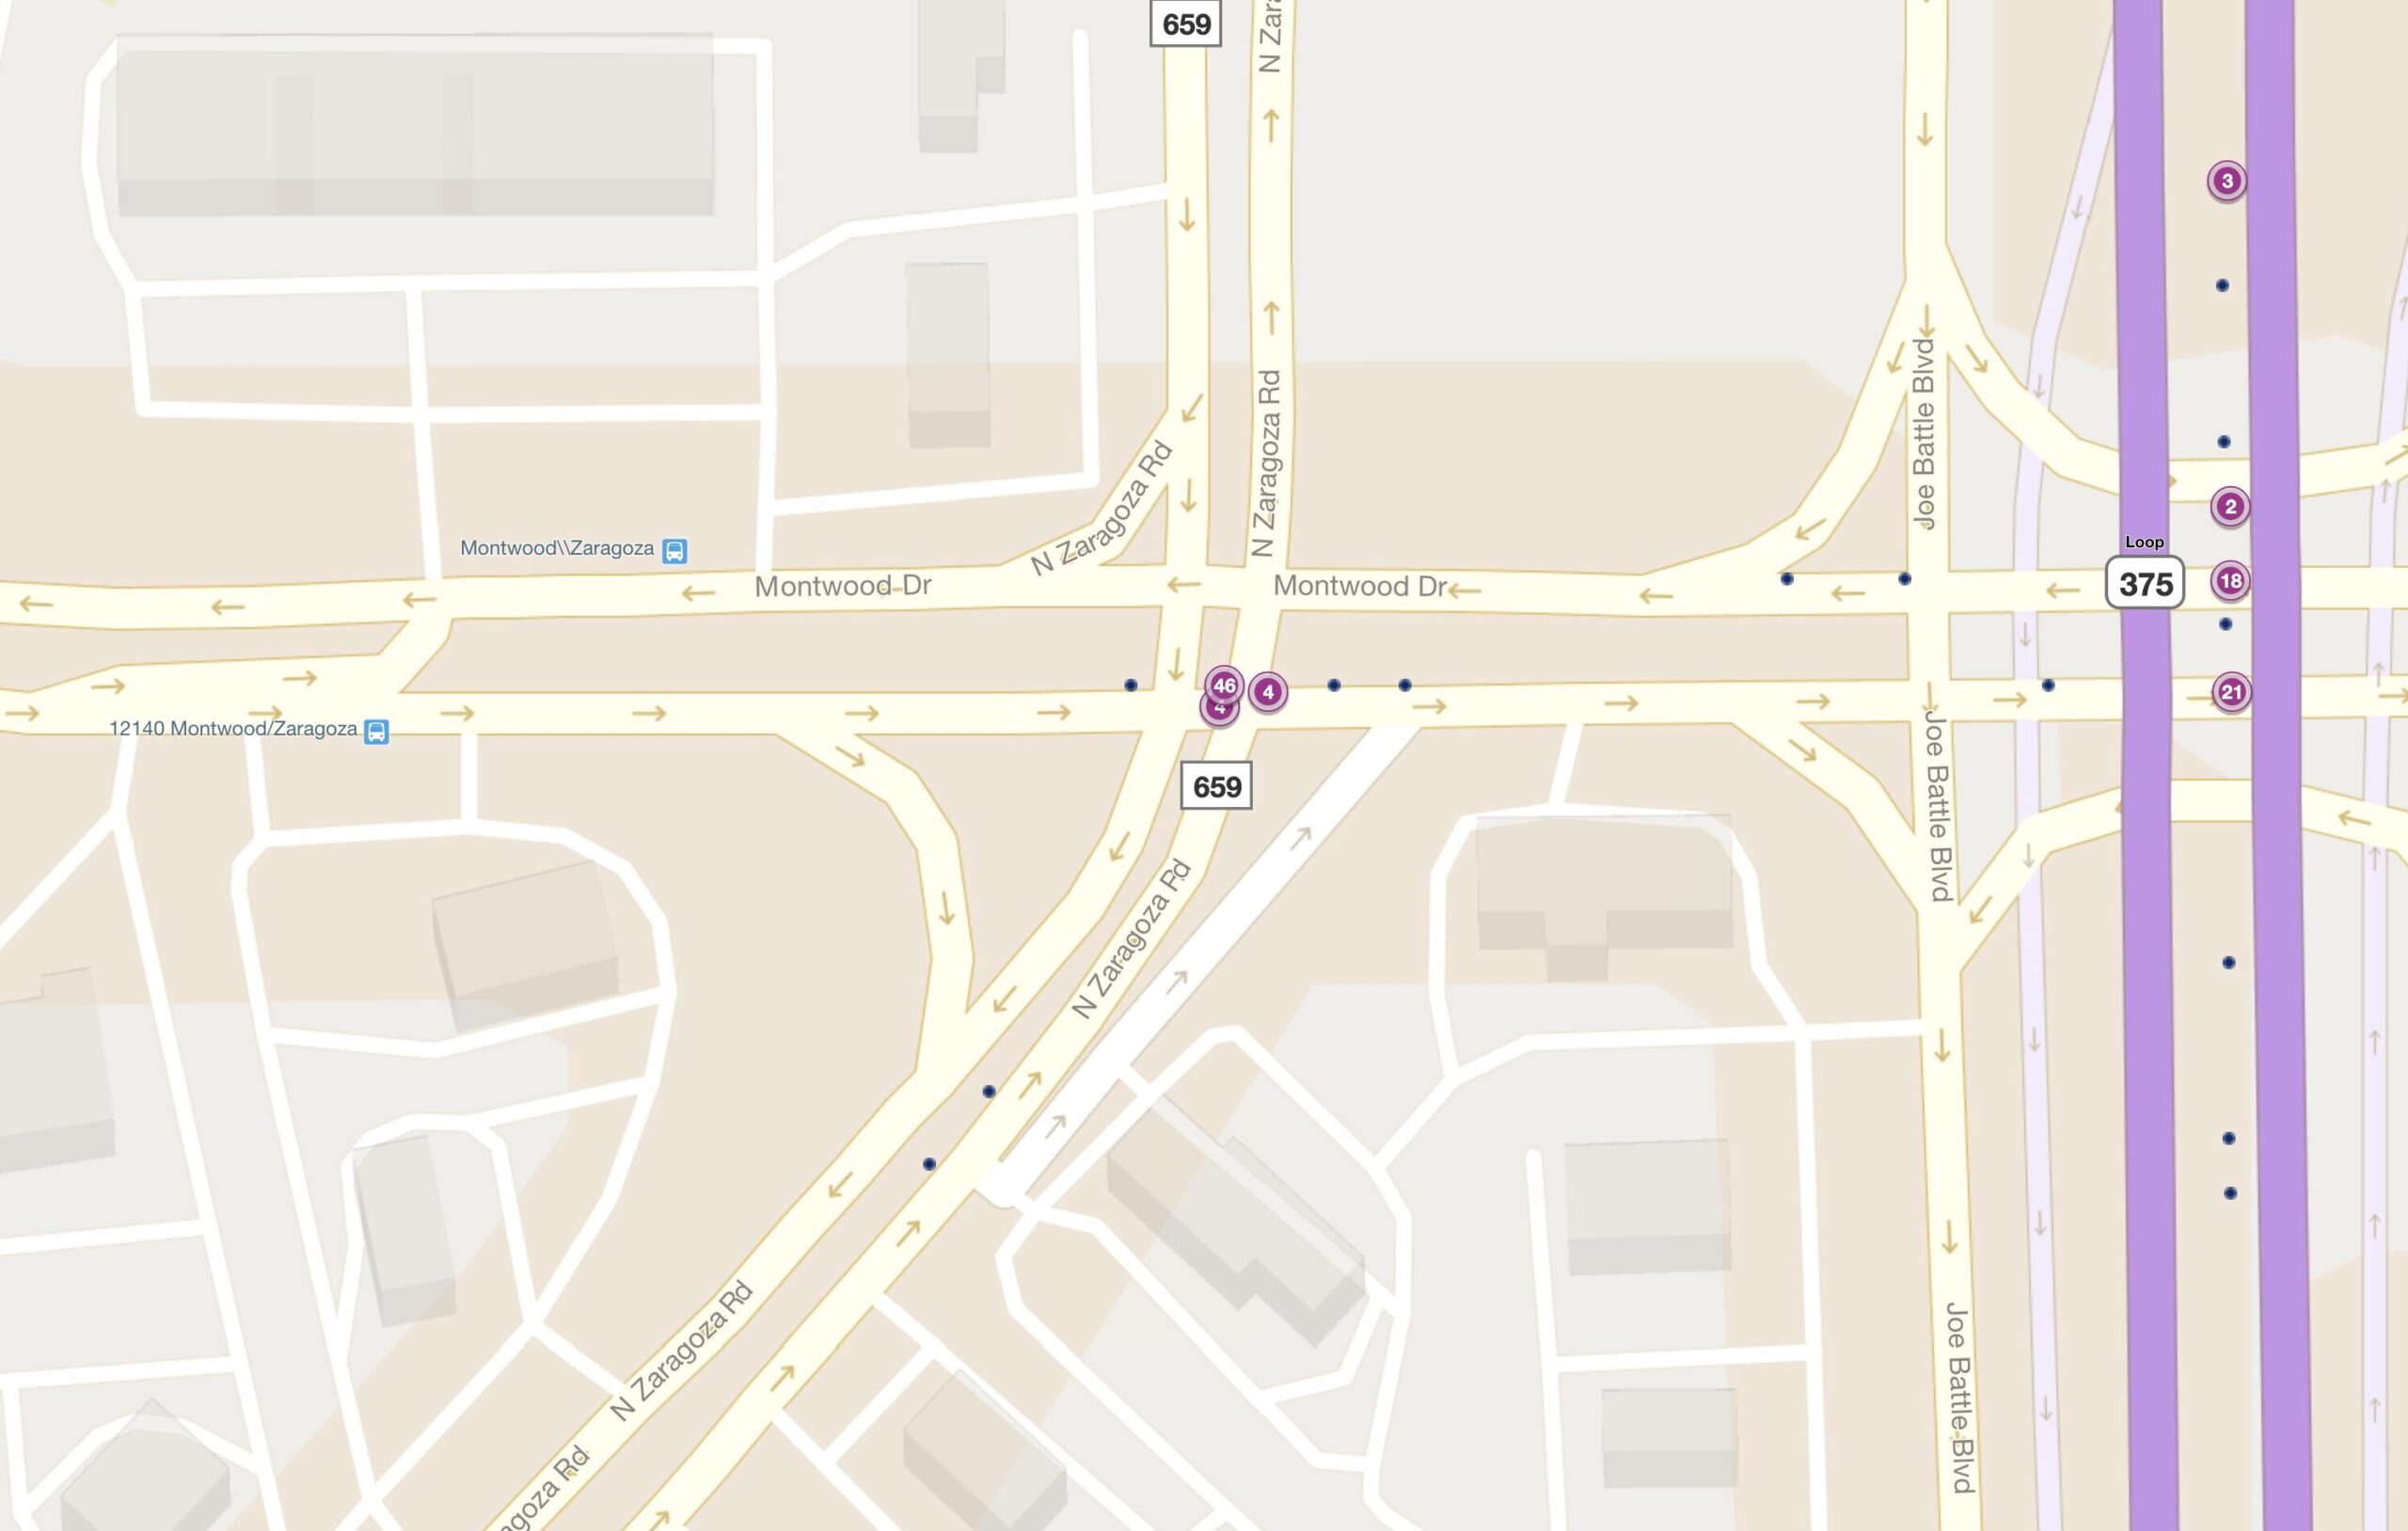 Cluster Map of 2023 Car Accidents at Montwood Dr. & N. Zaragoza Rd. (TXDOT)